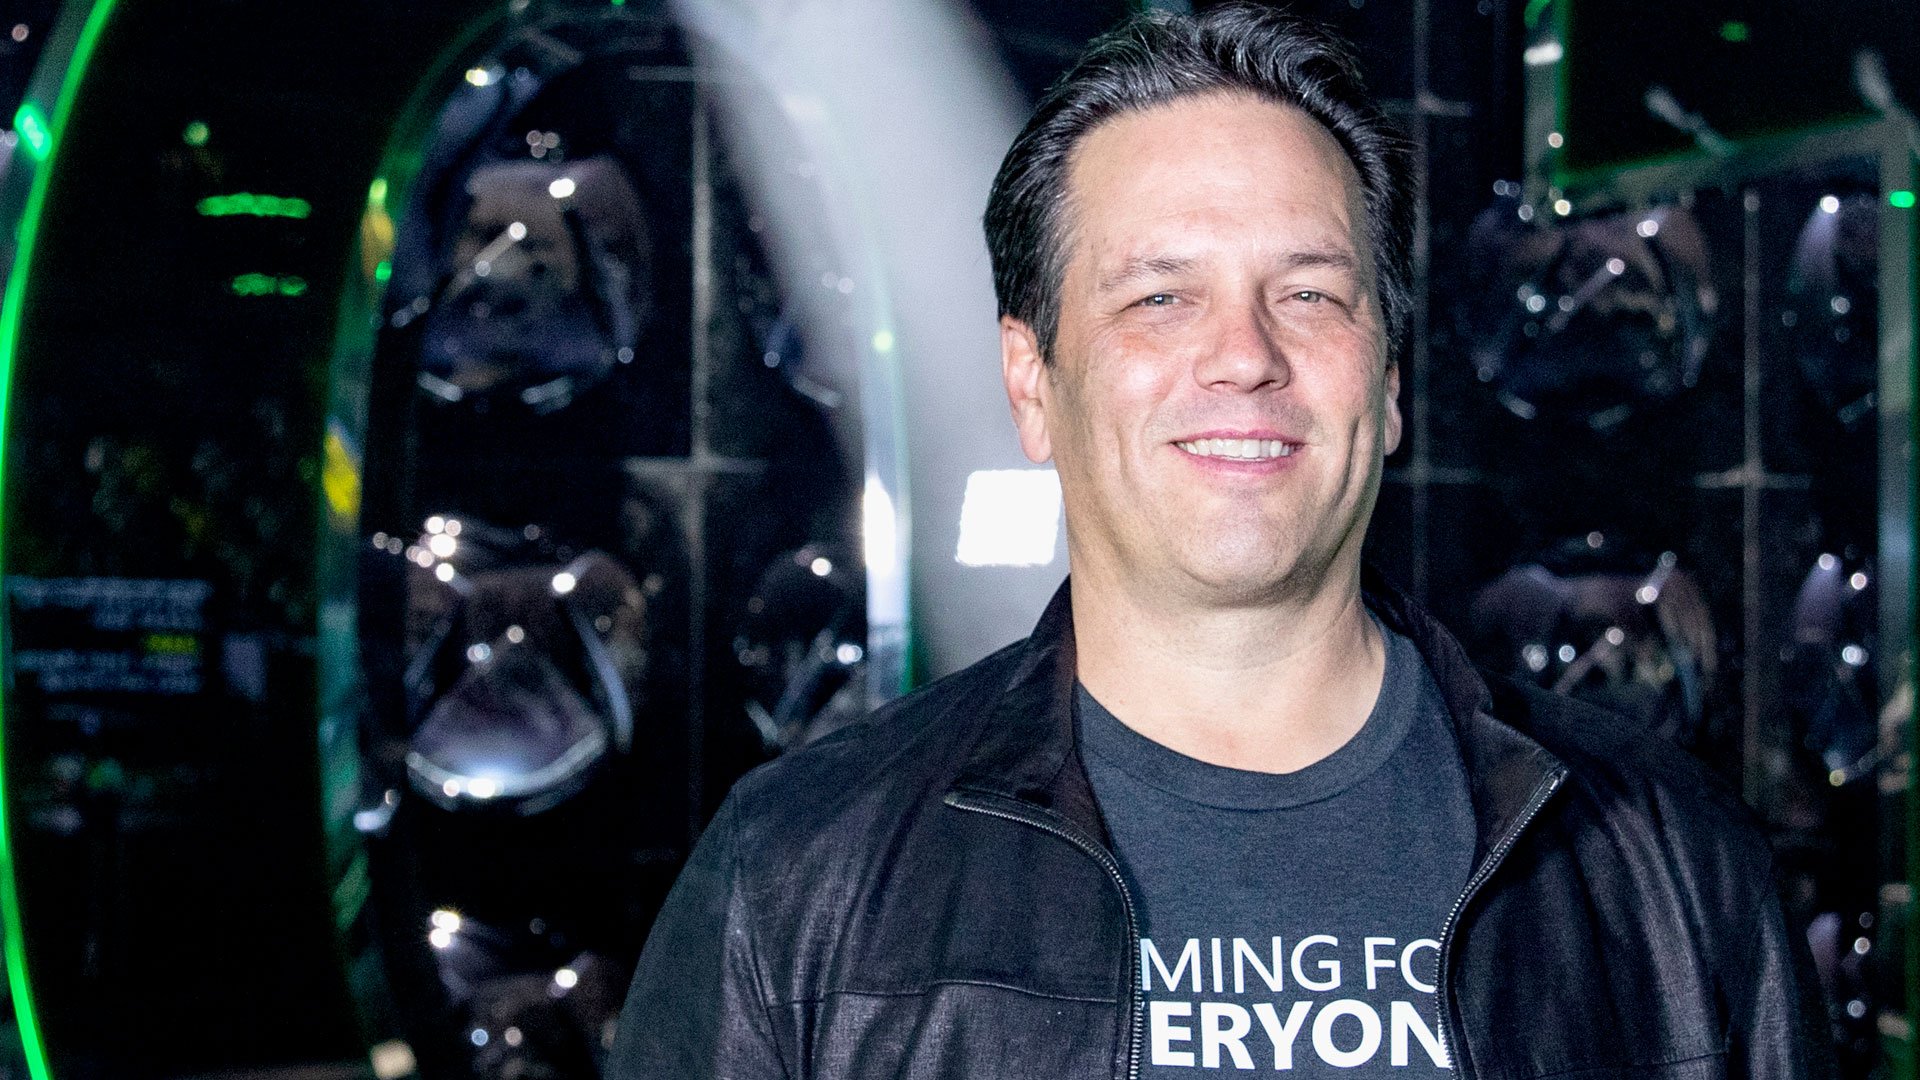 Phil Spencer says it 'will take time' to get Activision games on Game Pass